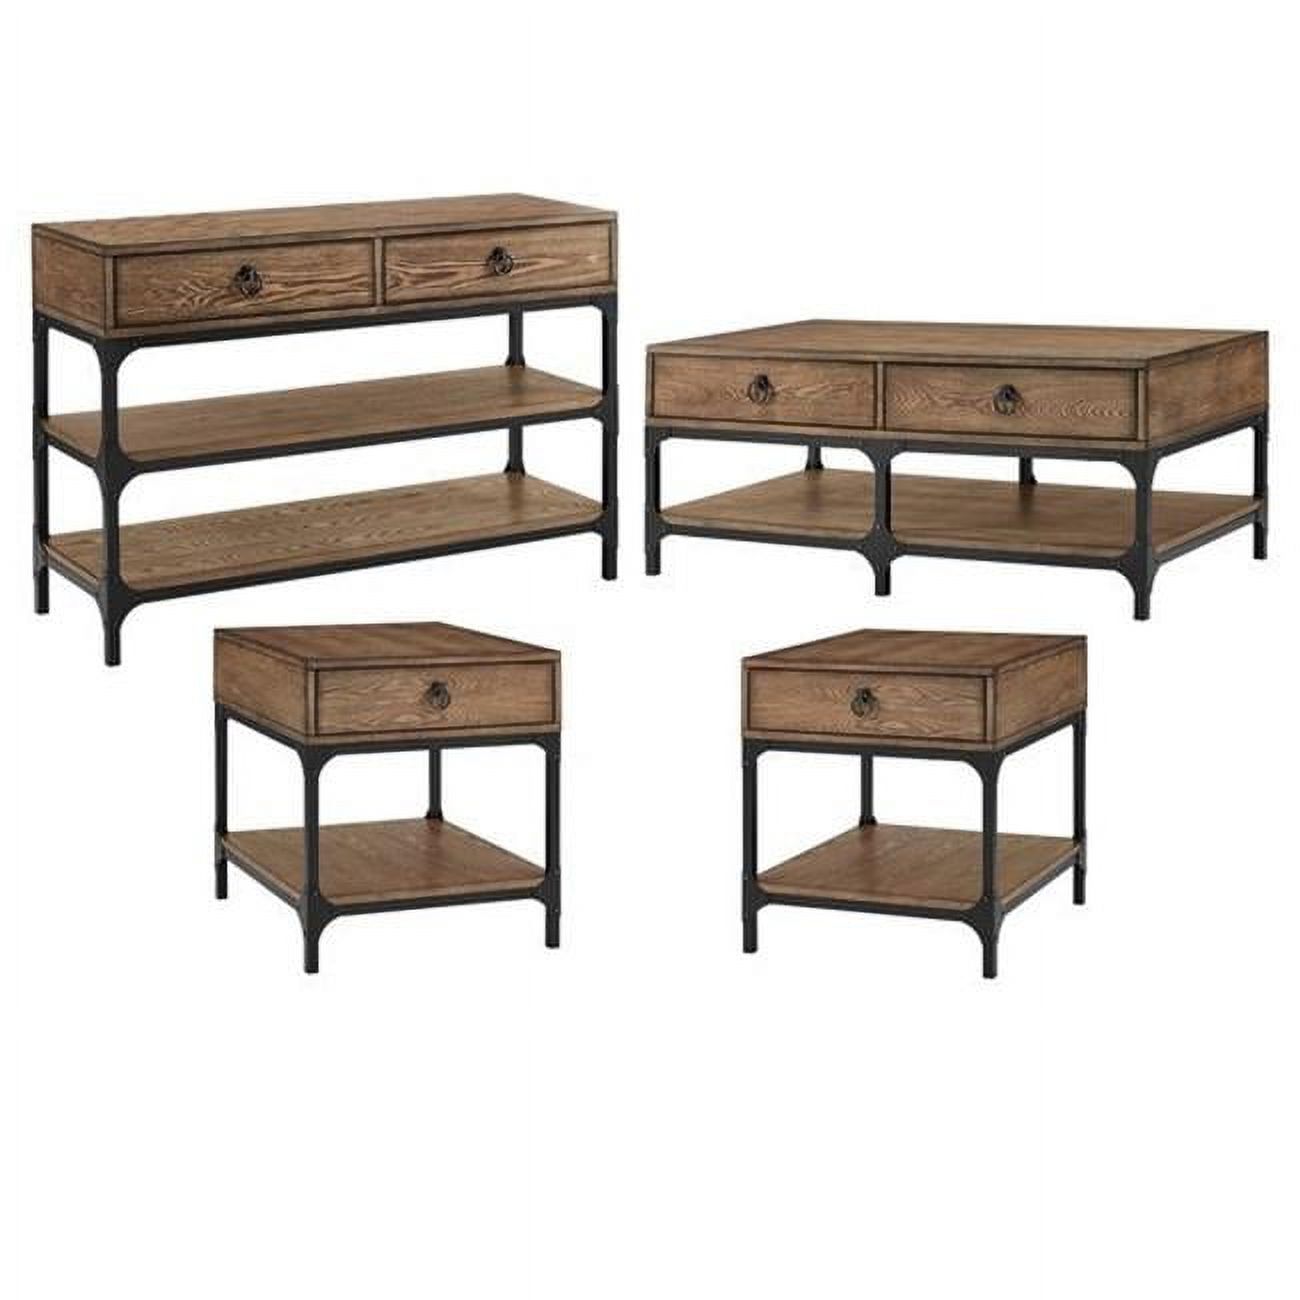 Crosley Furniture Trenton 4 Piece Set - Console, Coffee, 2 Side Tables - image 1 of 1